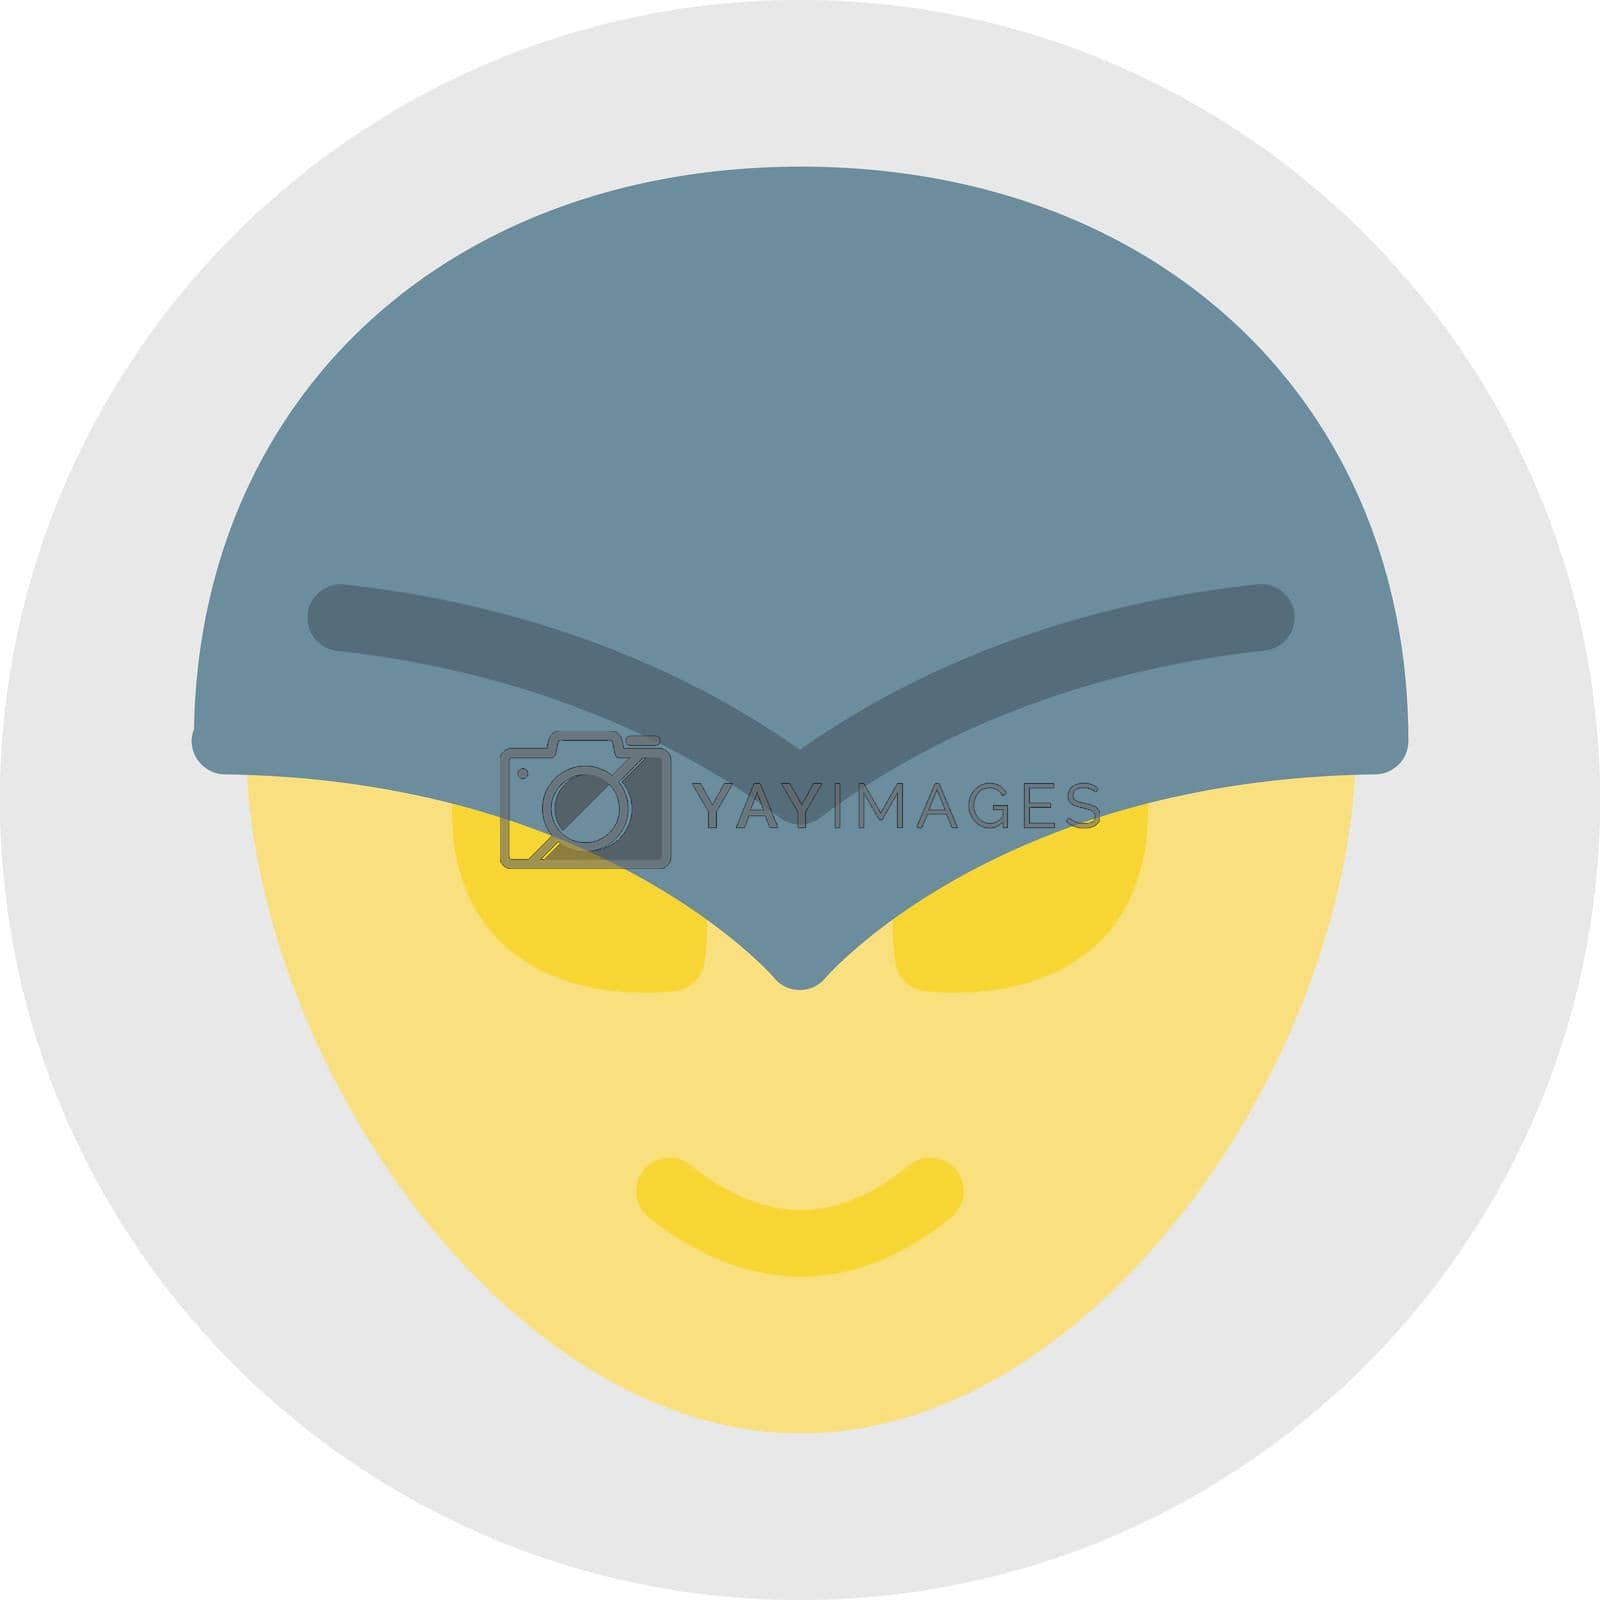 Royalty free image of alien by FlaticonsDesign